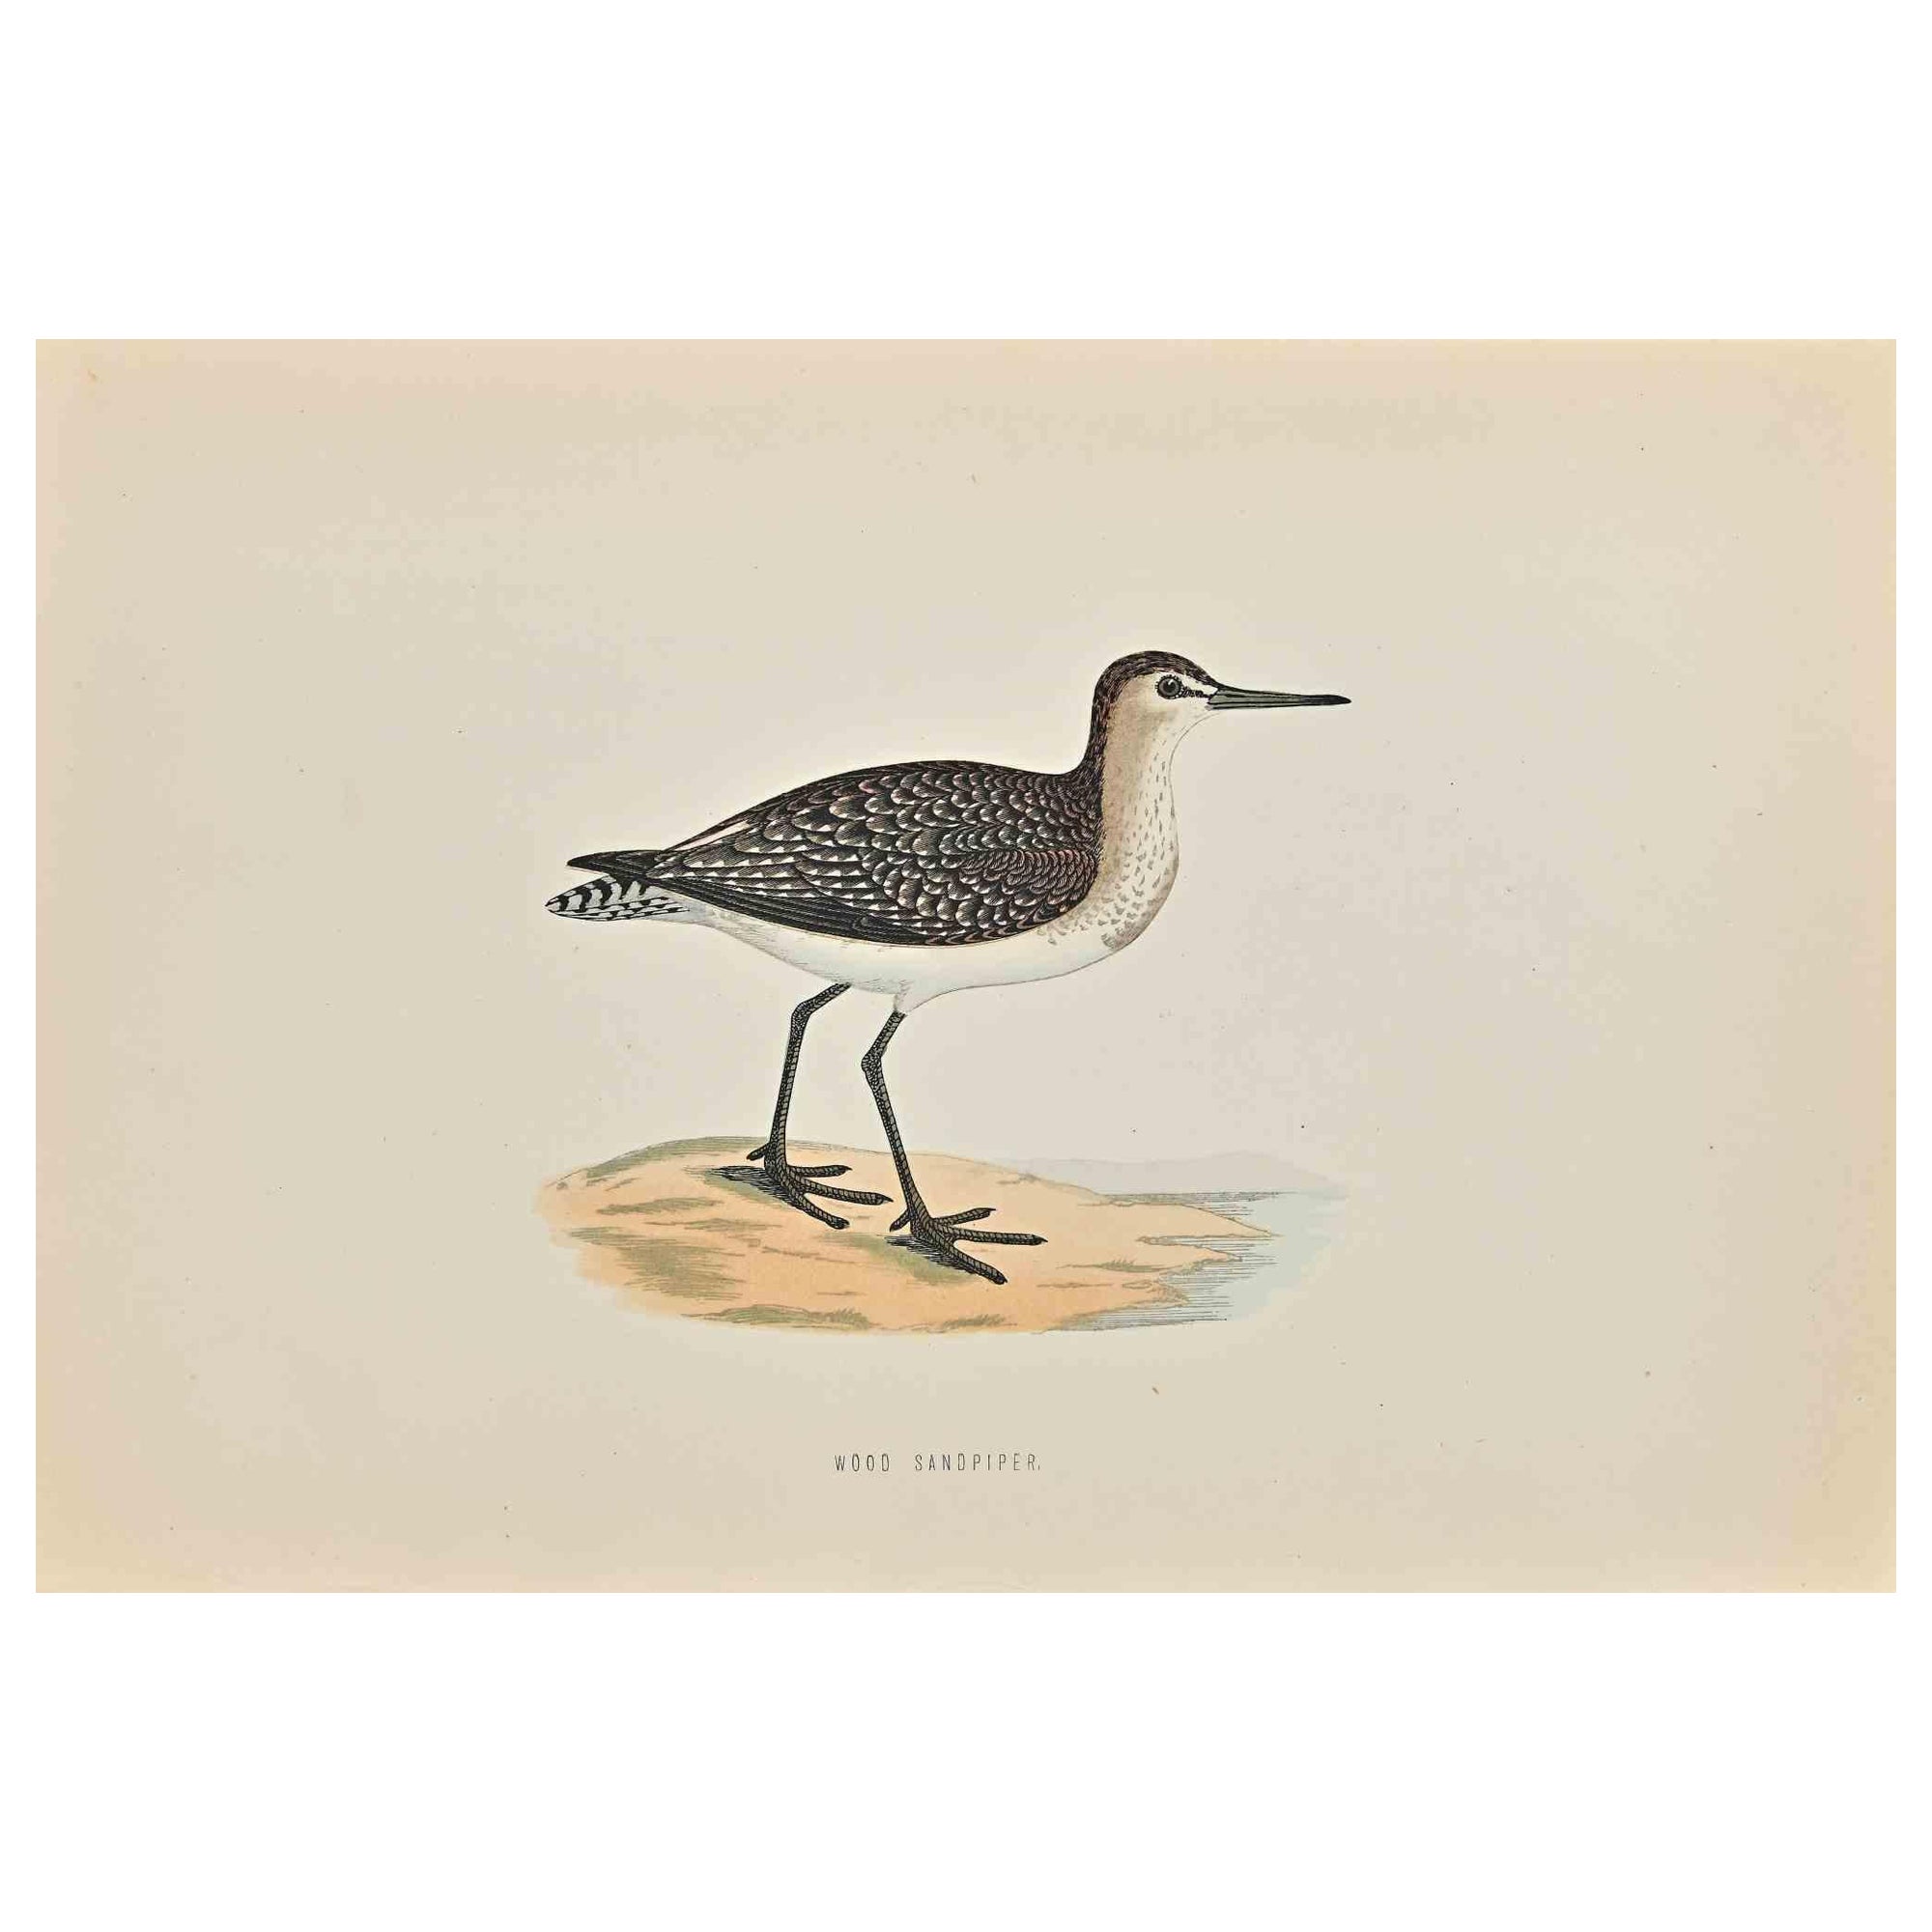 Wood Sandpiper is a modern artwork realized in 1870 by the British artist Alexander Francis Lydon (1836-1917).

Woodcut print on ivory-colored paper.

Hand-colored, published by London, Bell & Sons, 1870.  

The name of the bird is printed on the